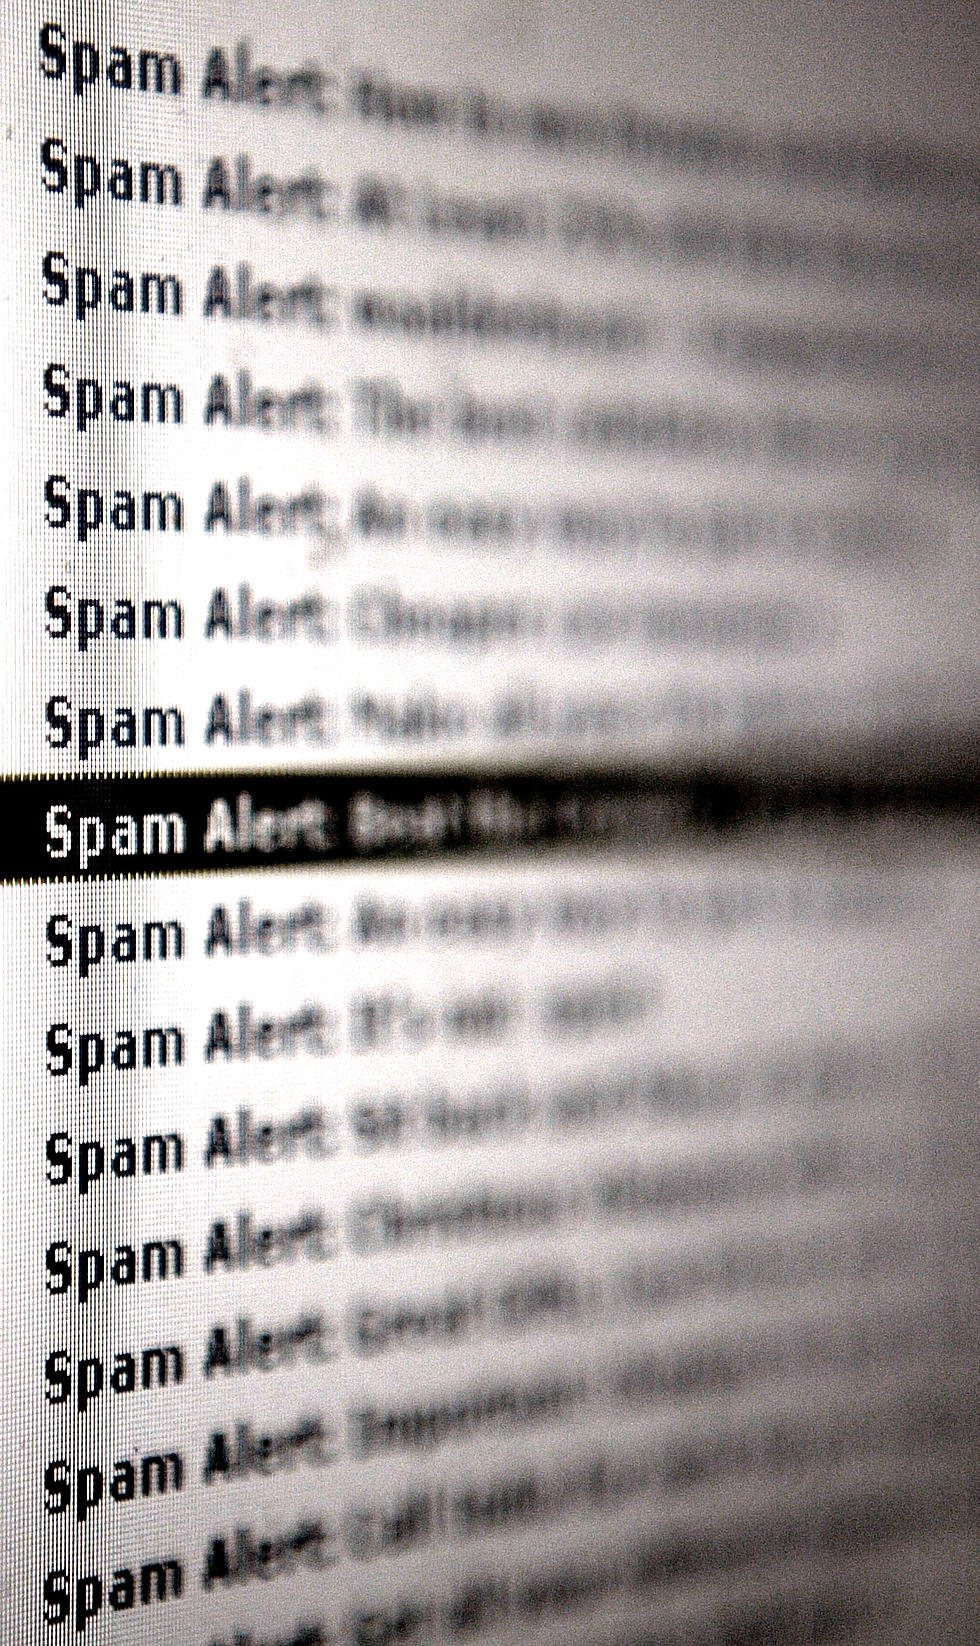 The FCC is Focusing On Annoying Spam Calls